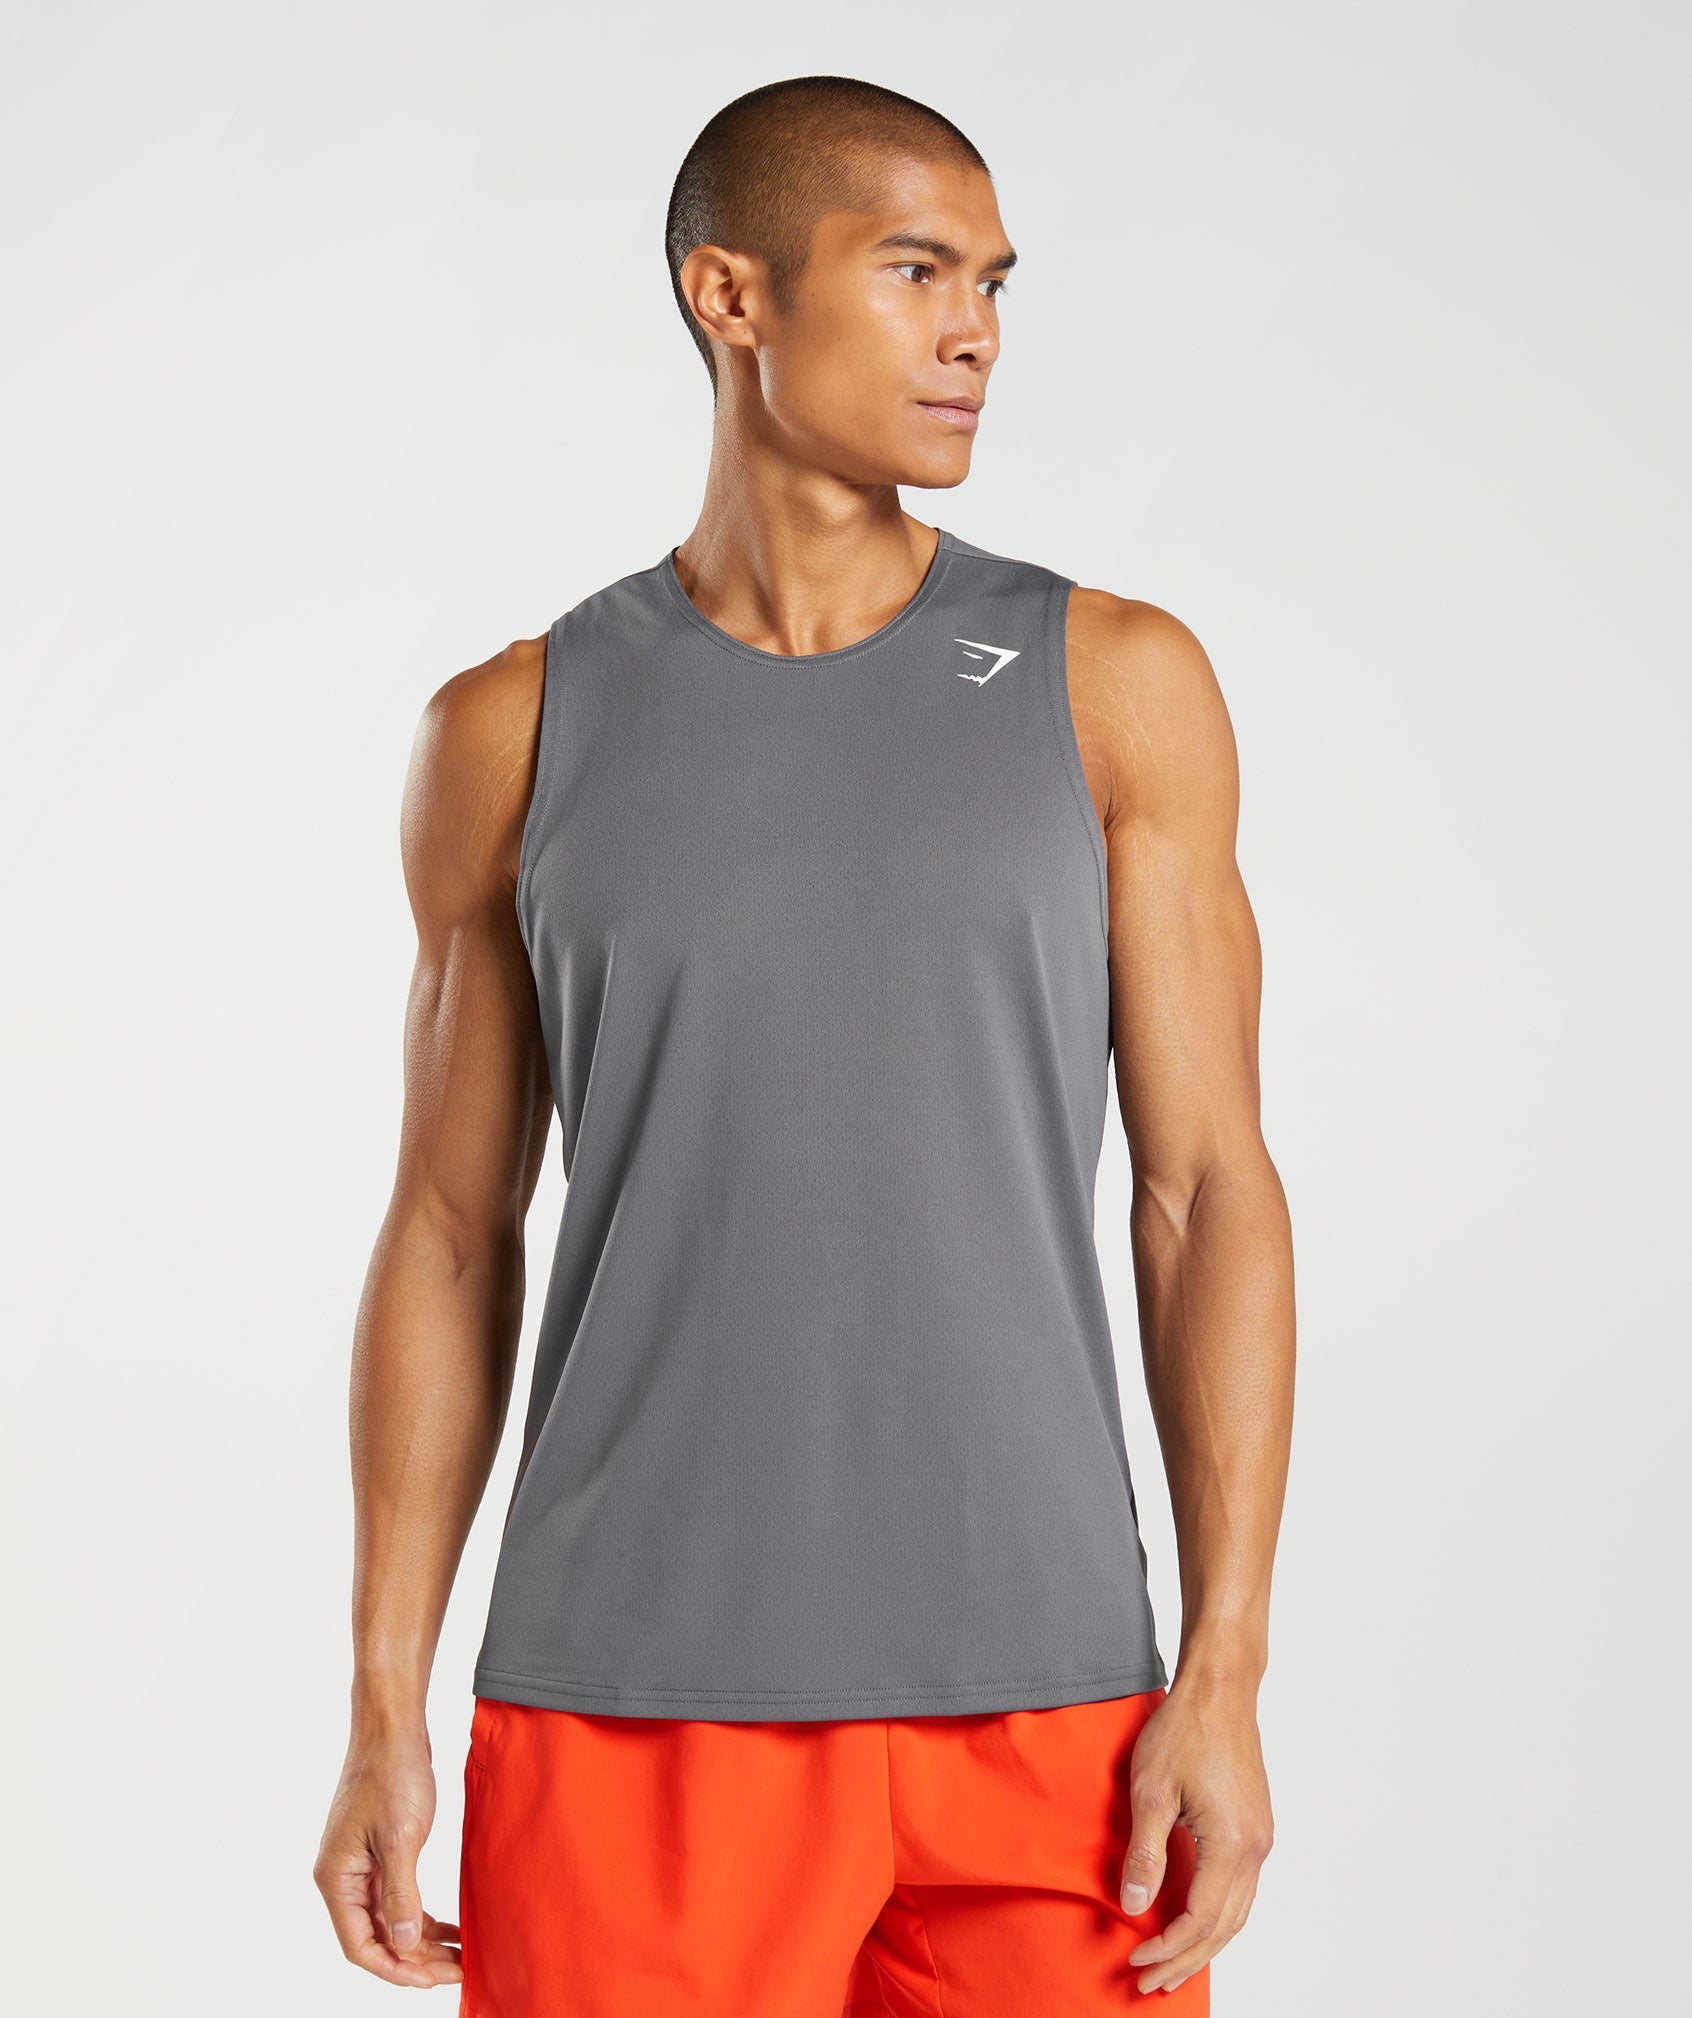 Arrival Tank in Silhouette Grey - view 1